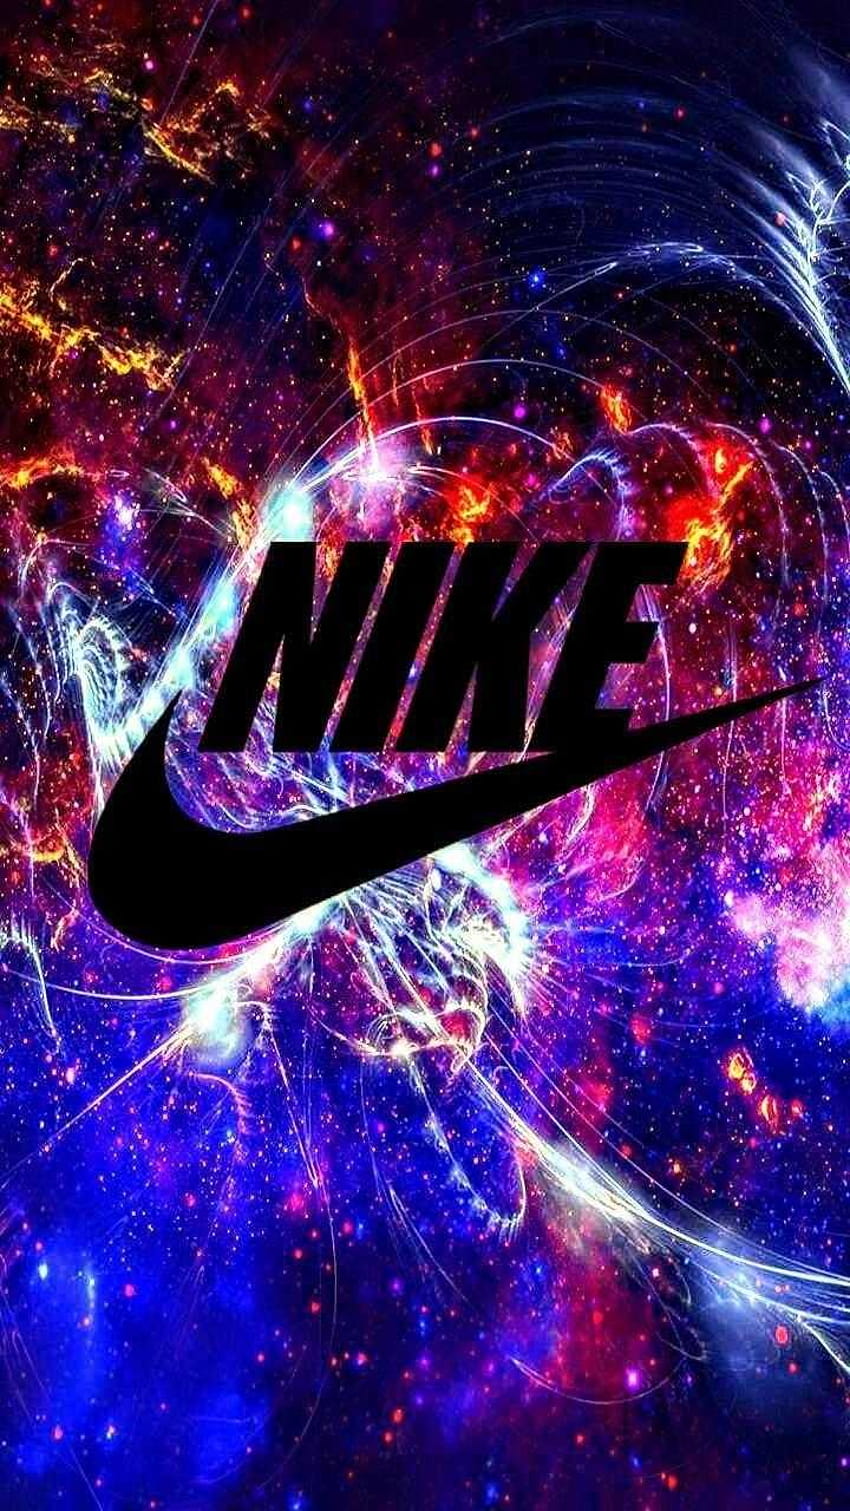 Download Nike neon wallpaper by RevoltPS4  29  Free on ZEDGE now Browse  millions of popular logo Wallpapers a  Nike neon Nike wallpaper Nike  logo wallpapers